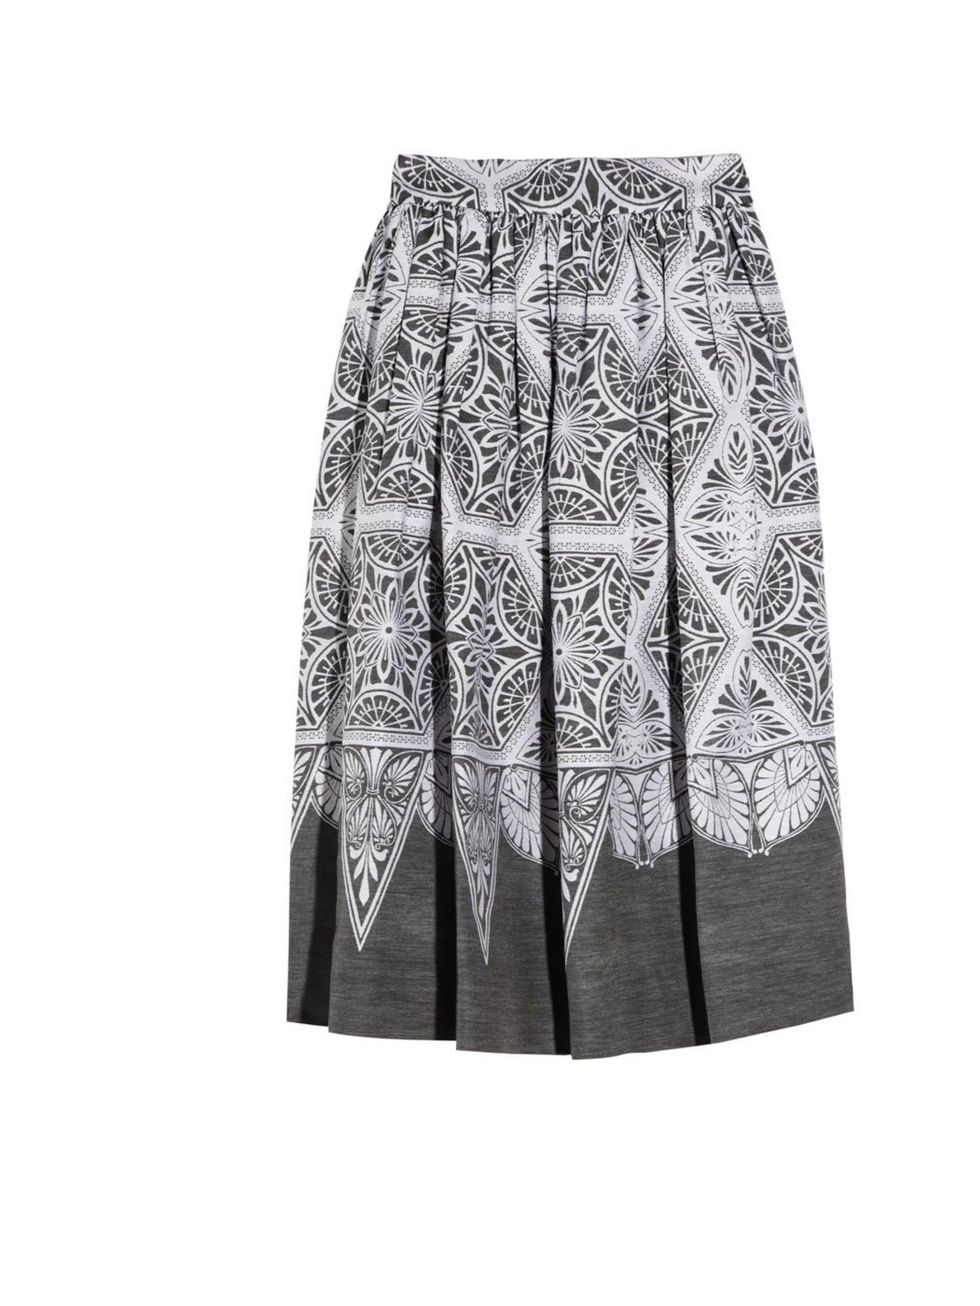 <p>Jonathan Saunders 'Emilia' pleated cotton-blend skirt, £660, at Net-a-Porter</p><p><a href="http://shopping.elleuk.com/browse/skirts?fts=jonathan+saunders">BUY NOW</a></p>